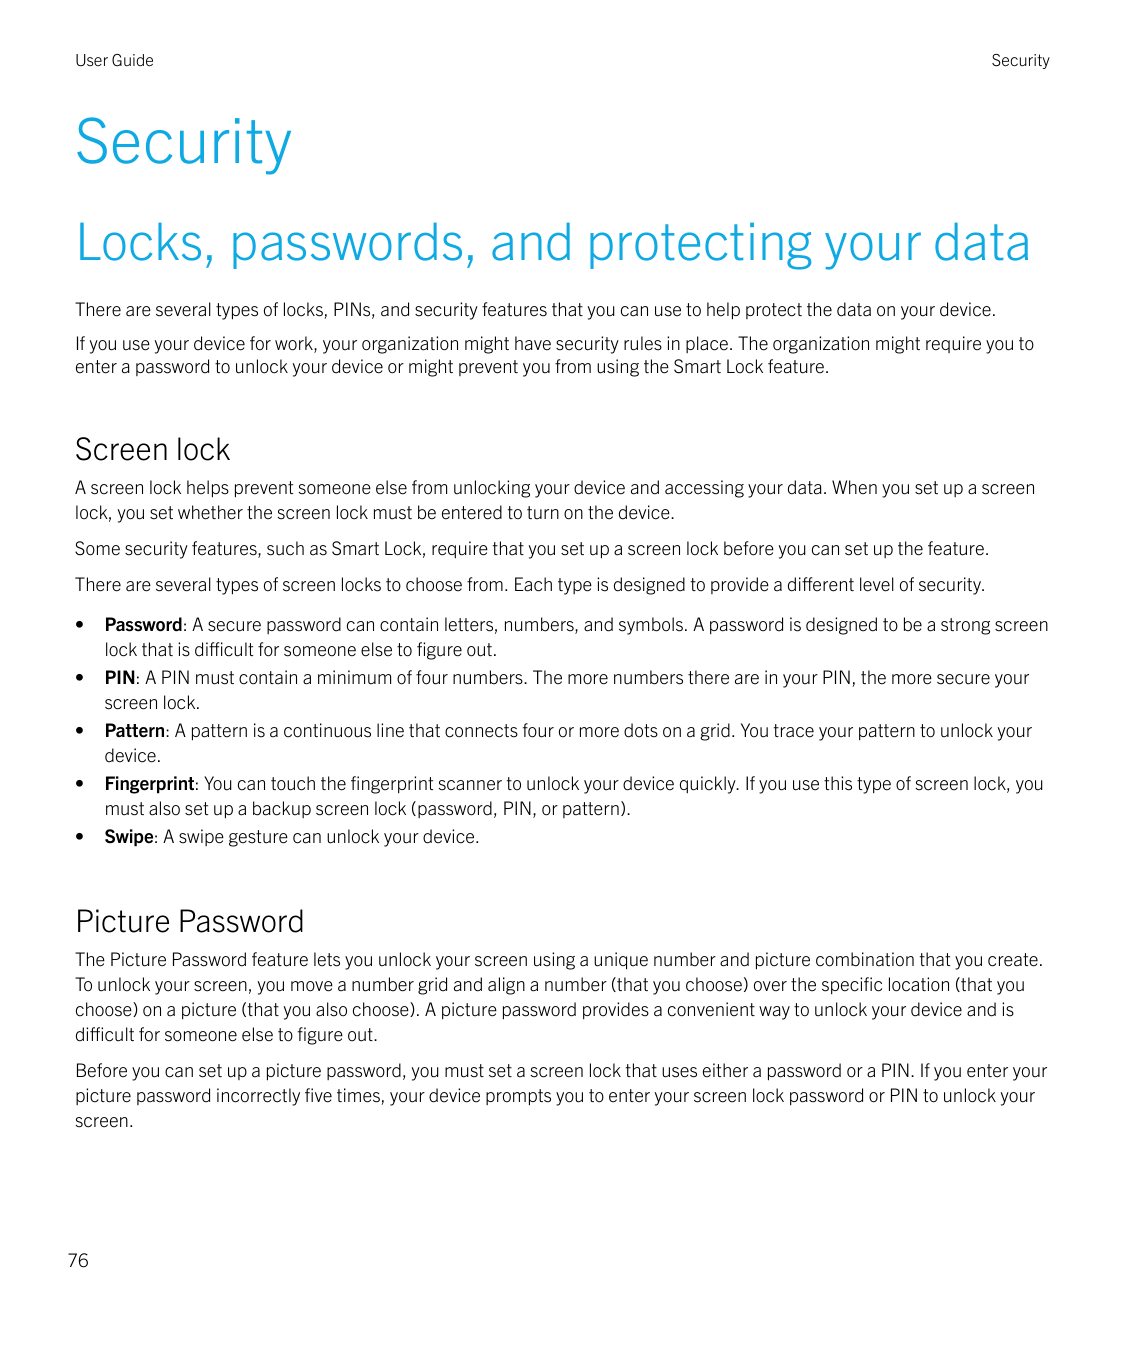 User GuideSecuritySecurityLocks, passwords, and protecting your dataThere are several types of locks, PINs, and security feature